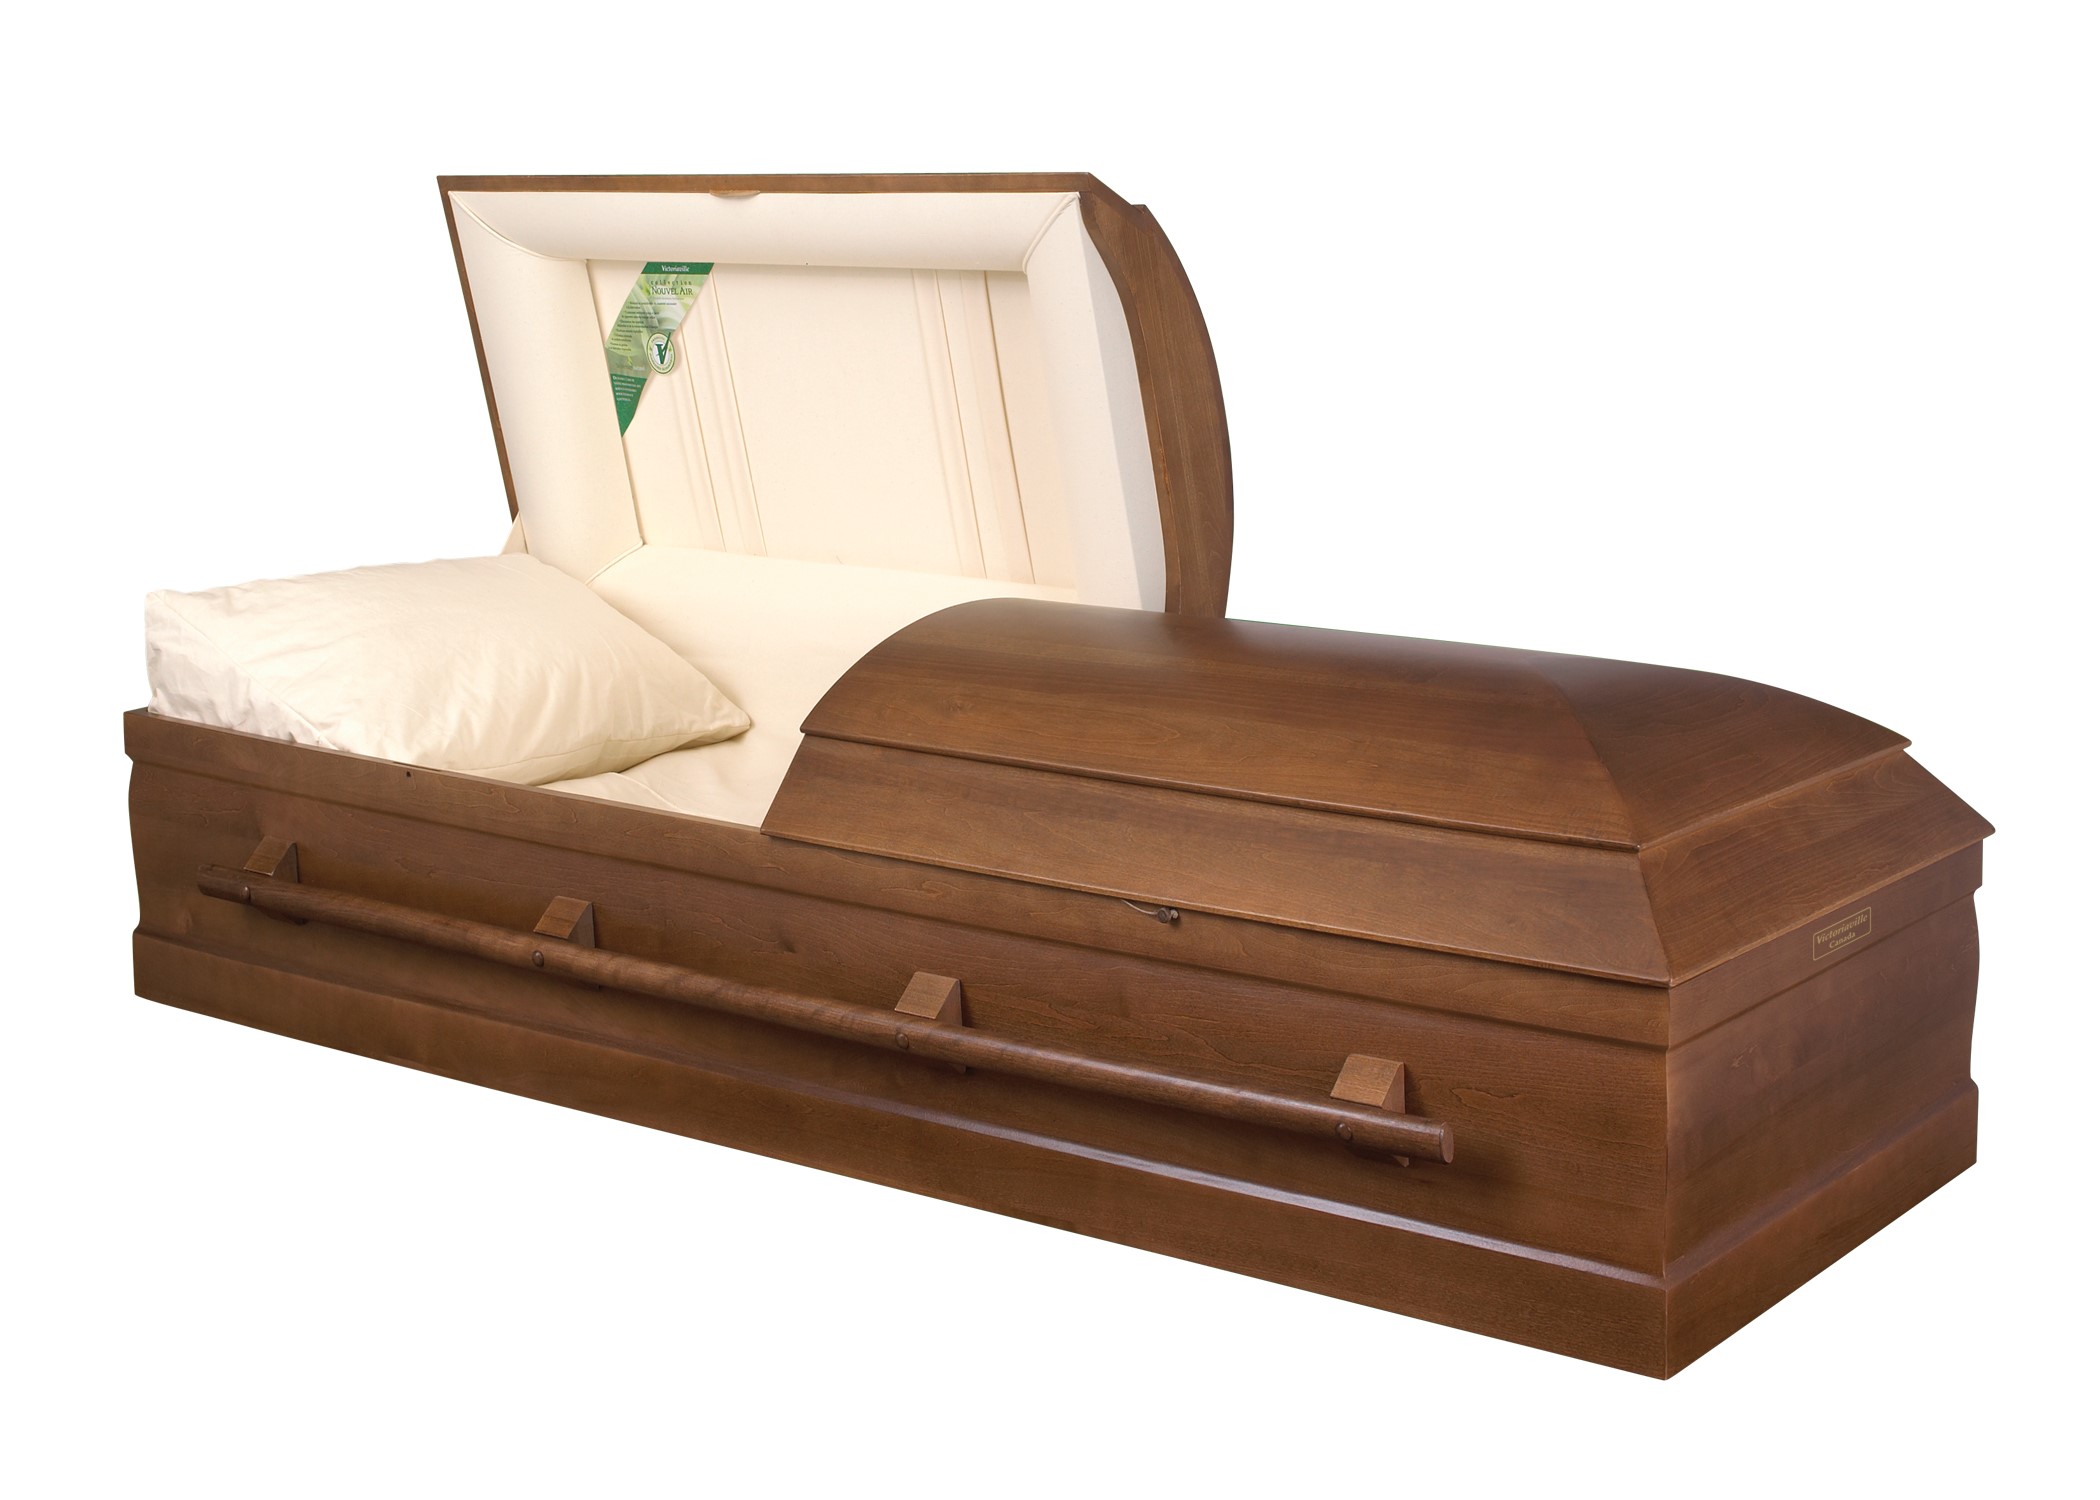 LOGICA
Poplar wood casket
Water-based rustic brown treatment, water-based satin finish
Natural cotton interior with excelsior mattress